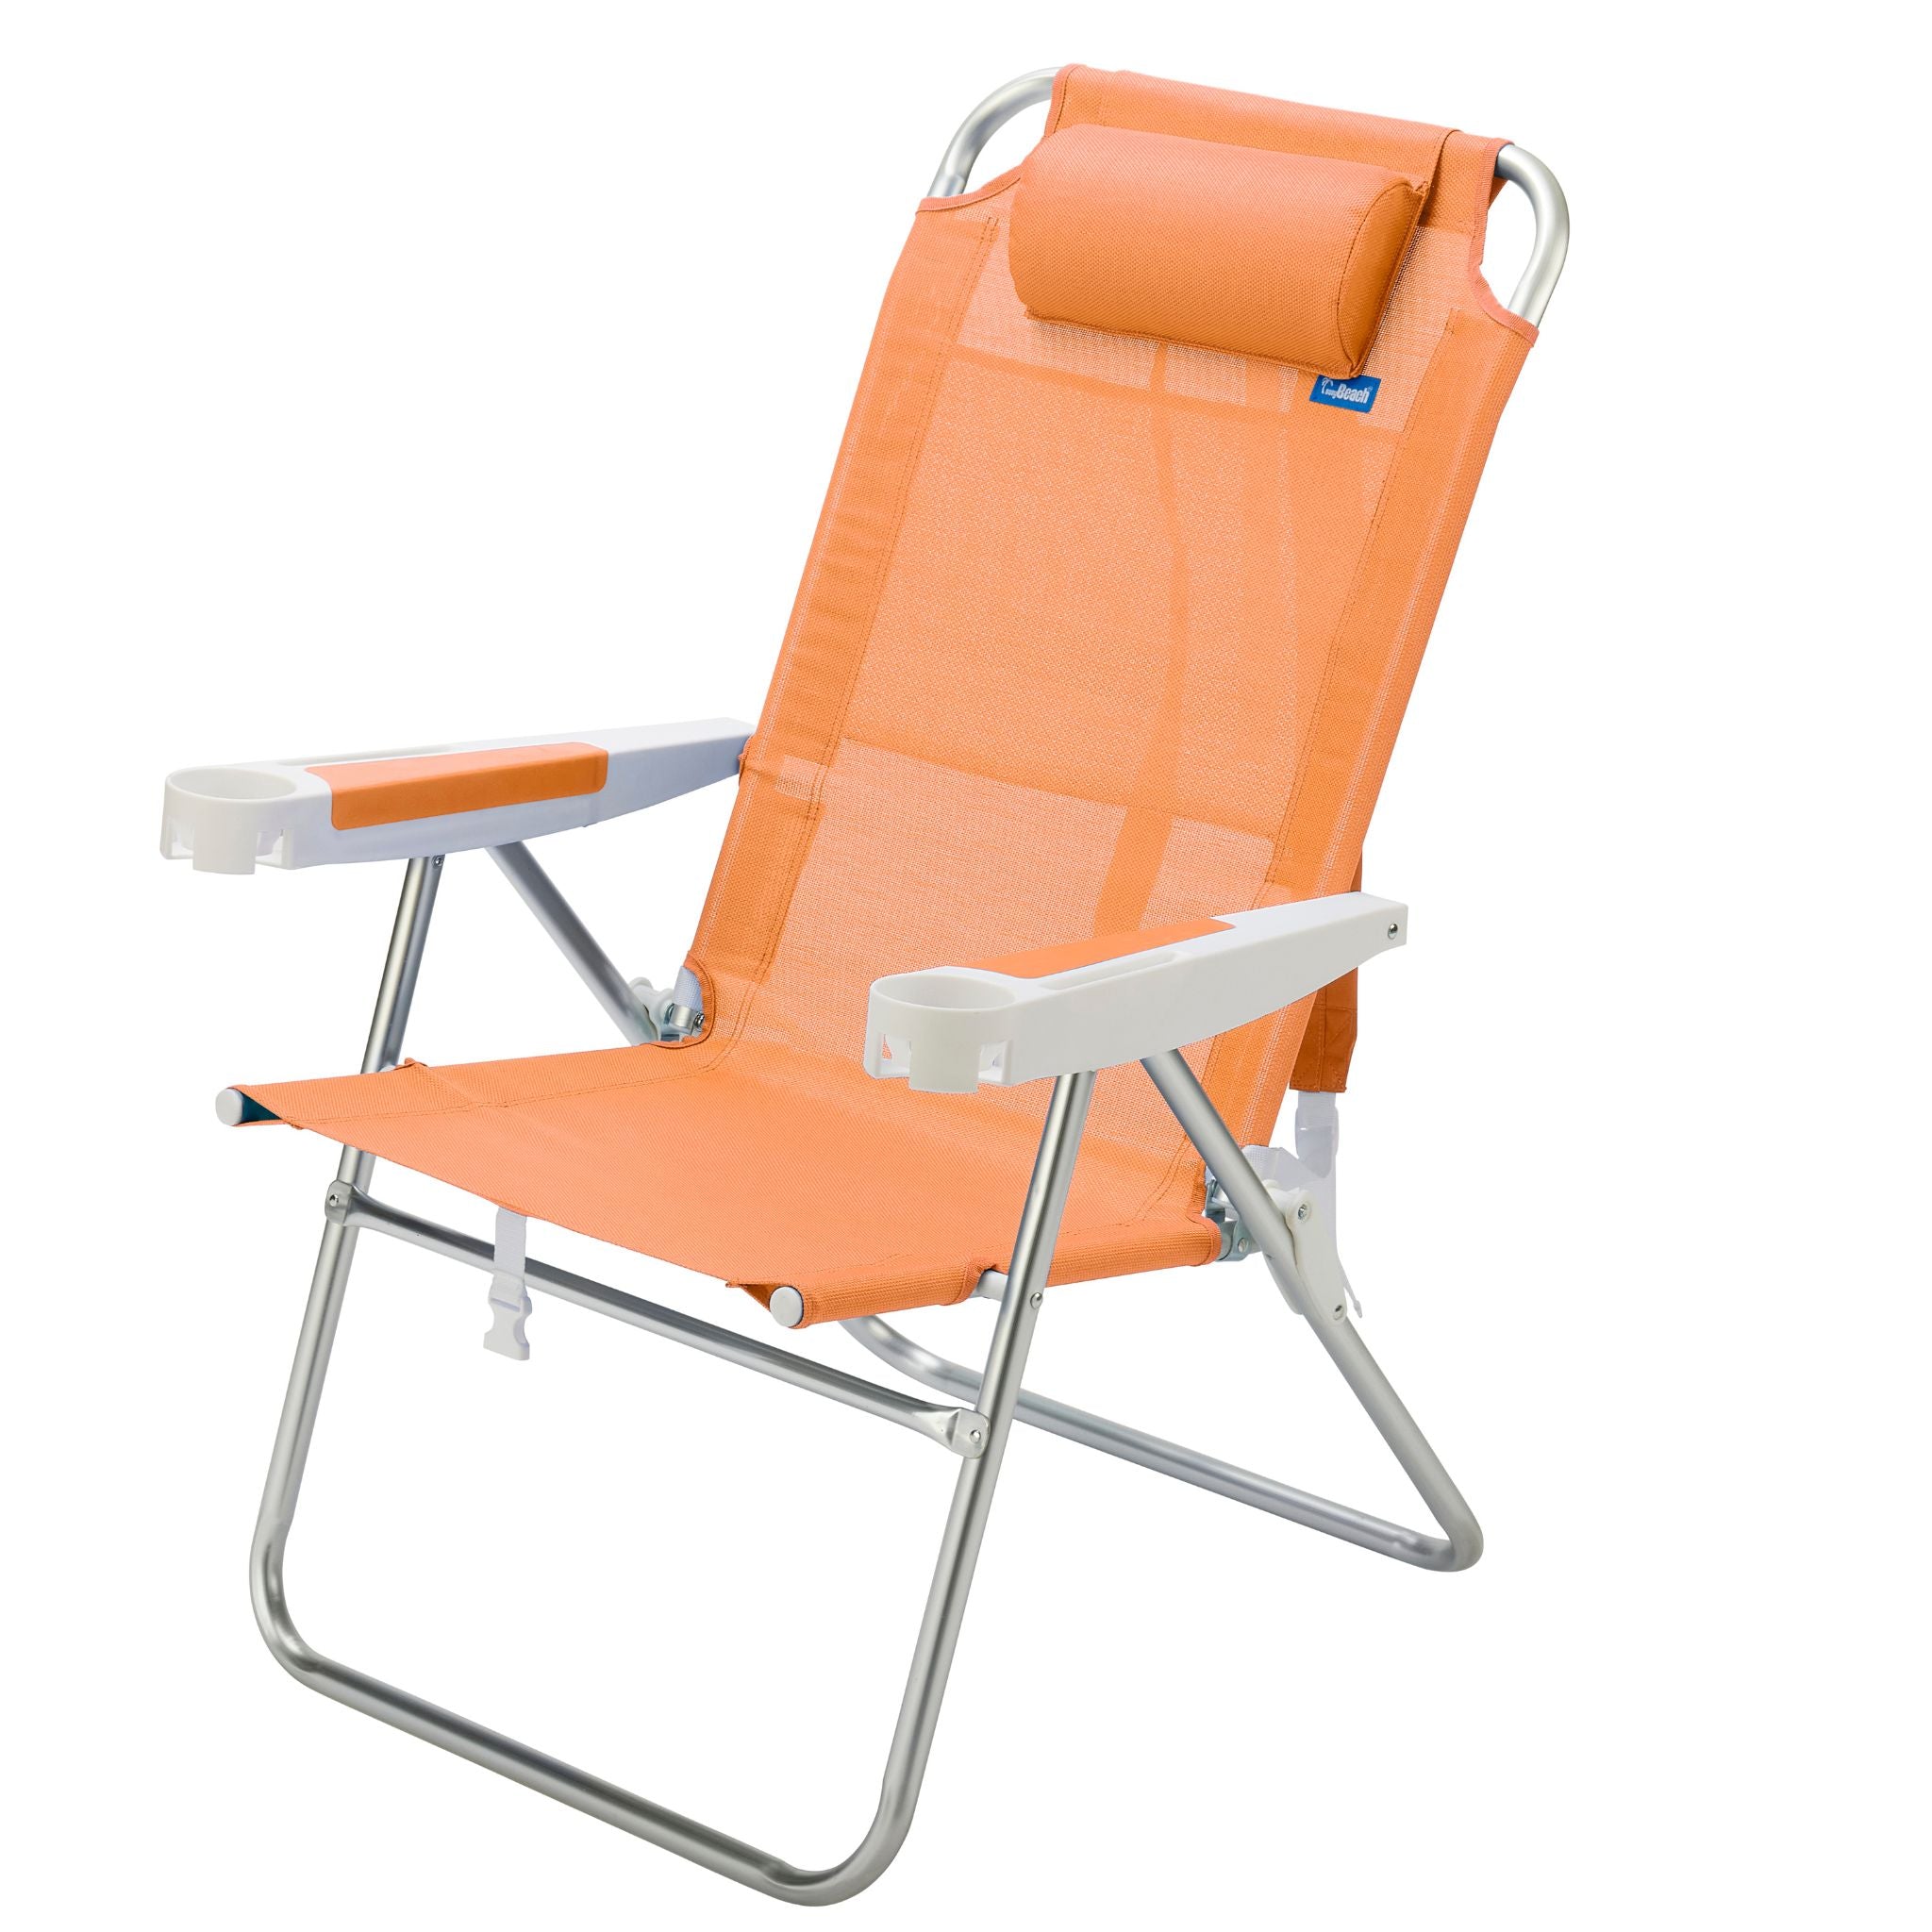 Set of Two (2) Tall Backpack Beach Chairs